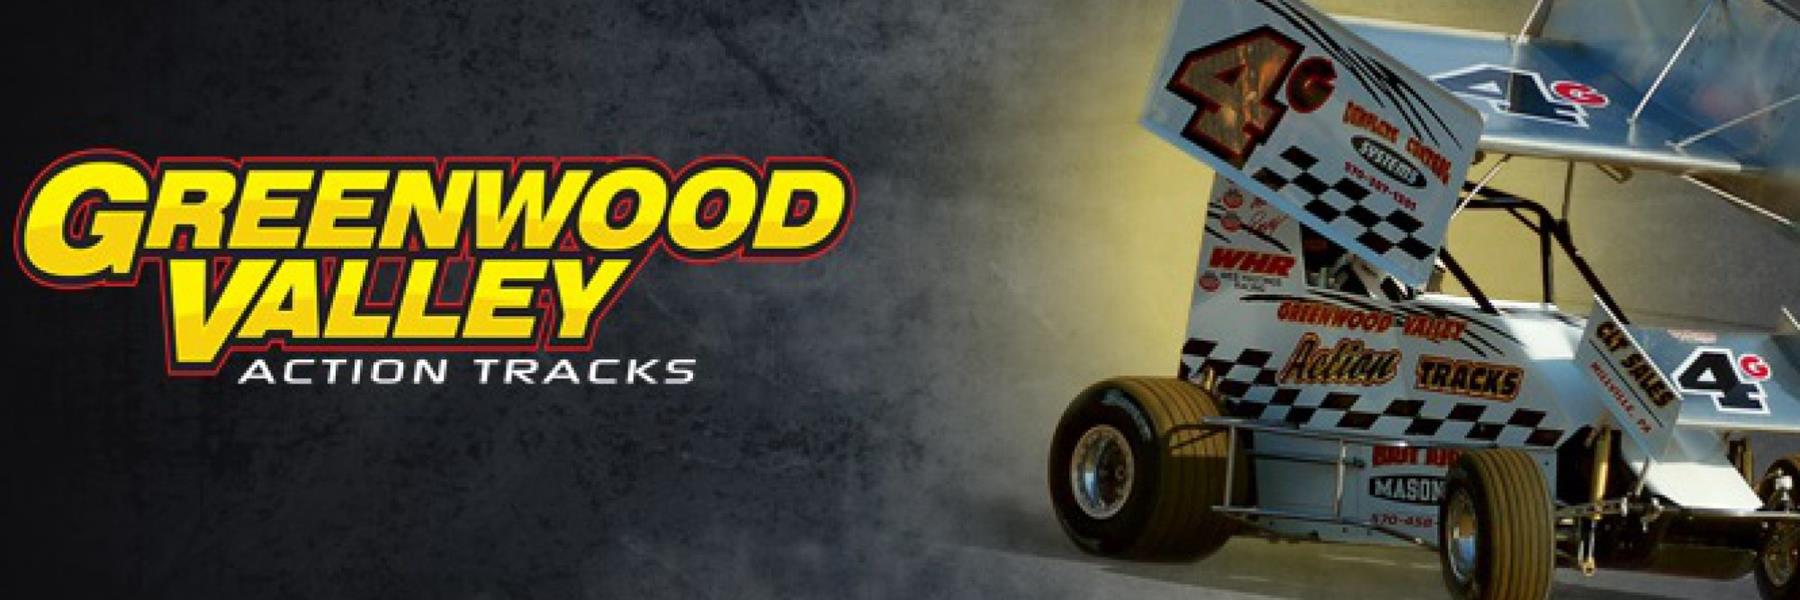 4/20/2019 - Greenwood Valley Action Track